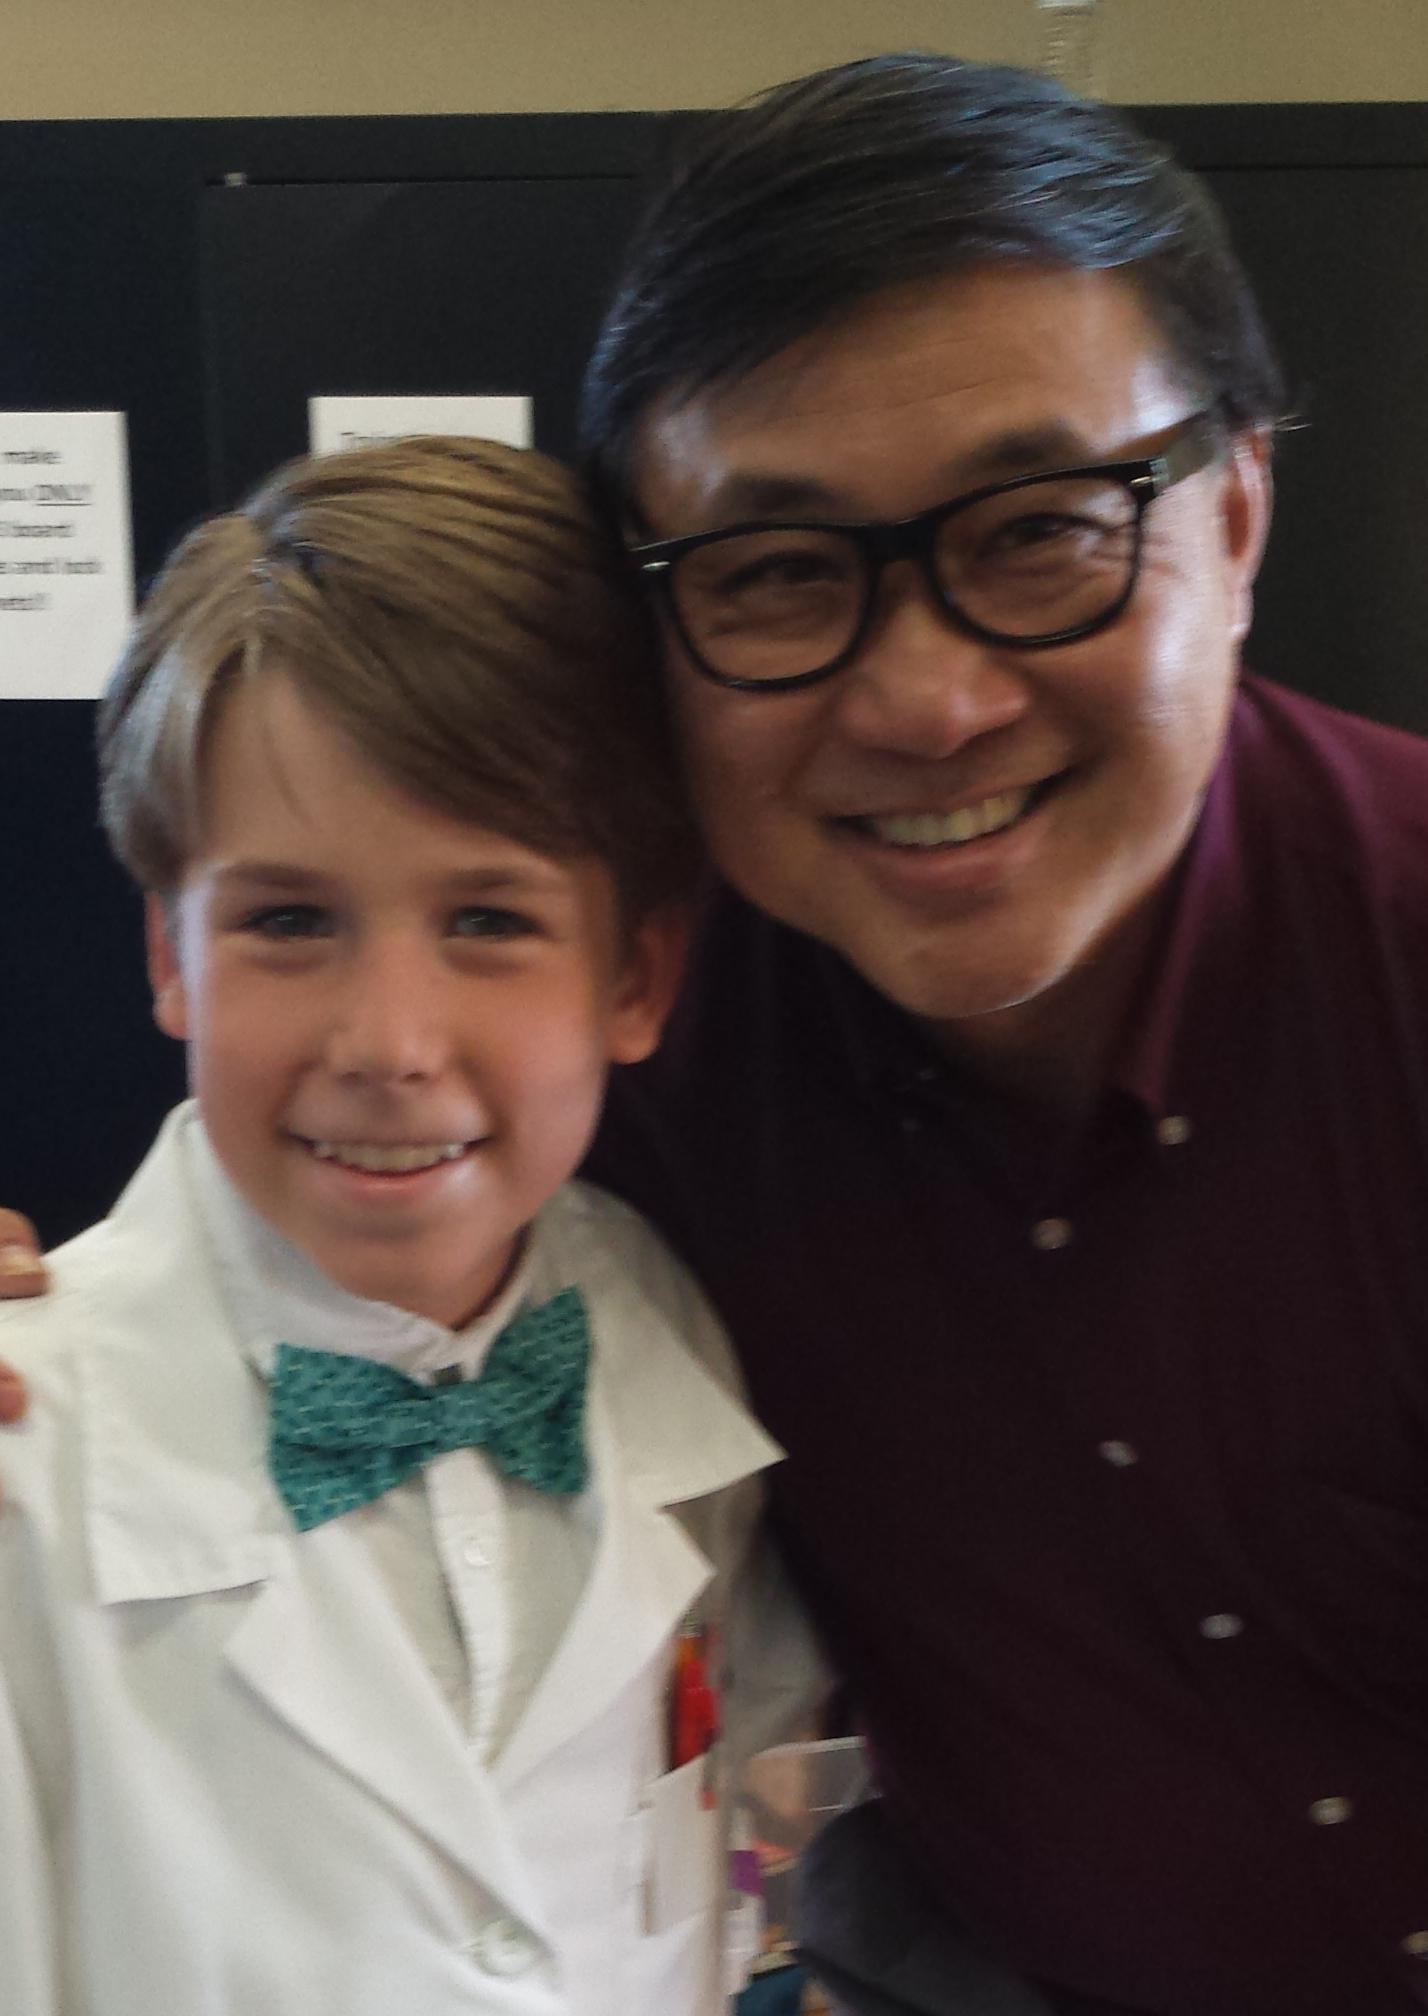 With fellow mad scientist - CA Care commercial